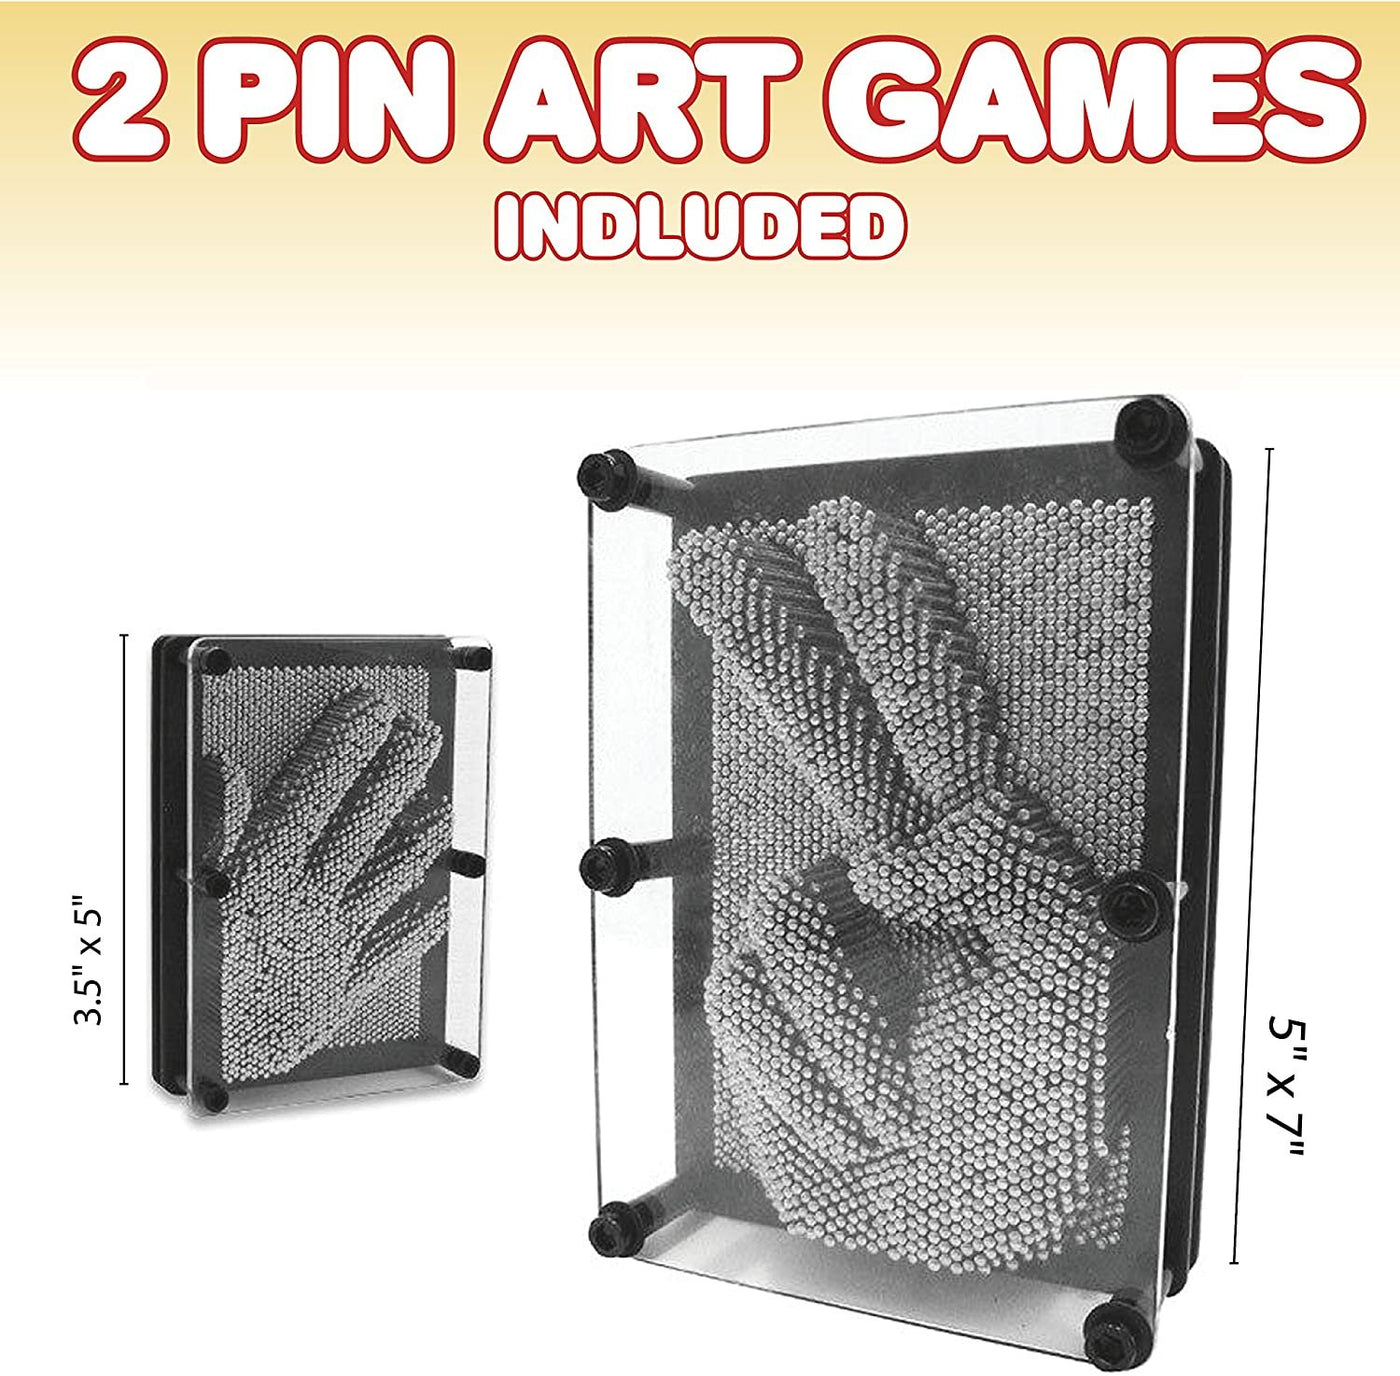 Classic Pin Art Game Set by ArtCreativity- Pin Art Toy for Autistic Kids-Includes Large 5 x 7" and Small 3.5 x 5" Boards- Hours of Fun - Durable- Nice Decoration- Best Gift for Kids or Adults